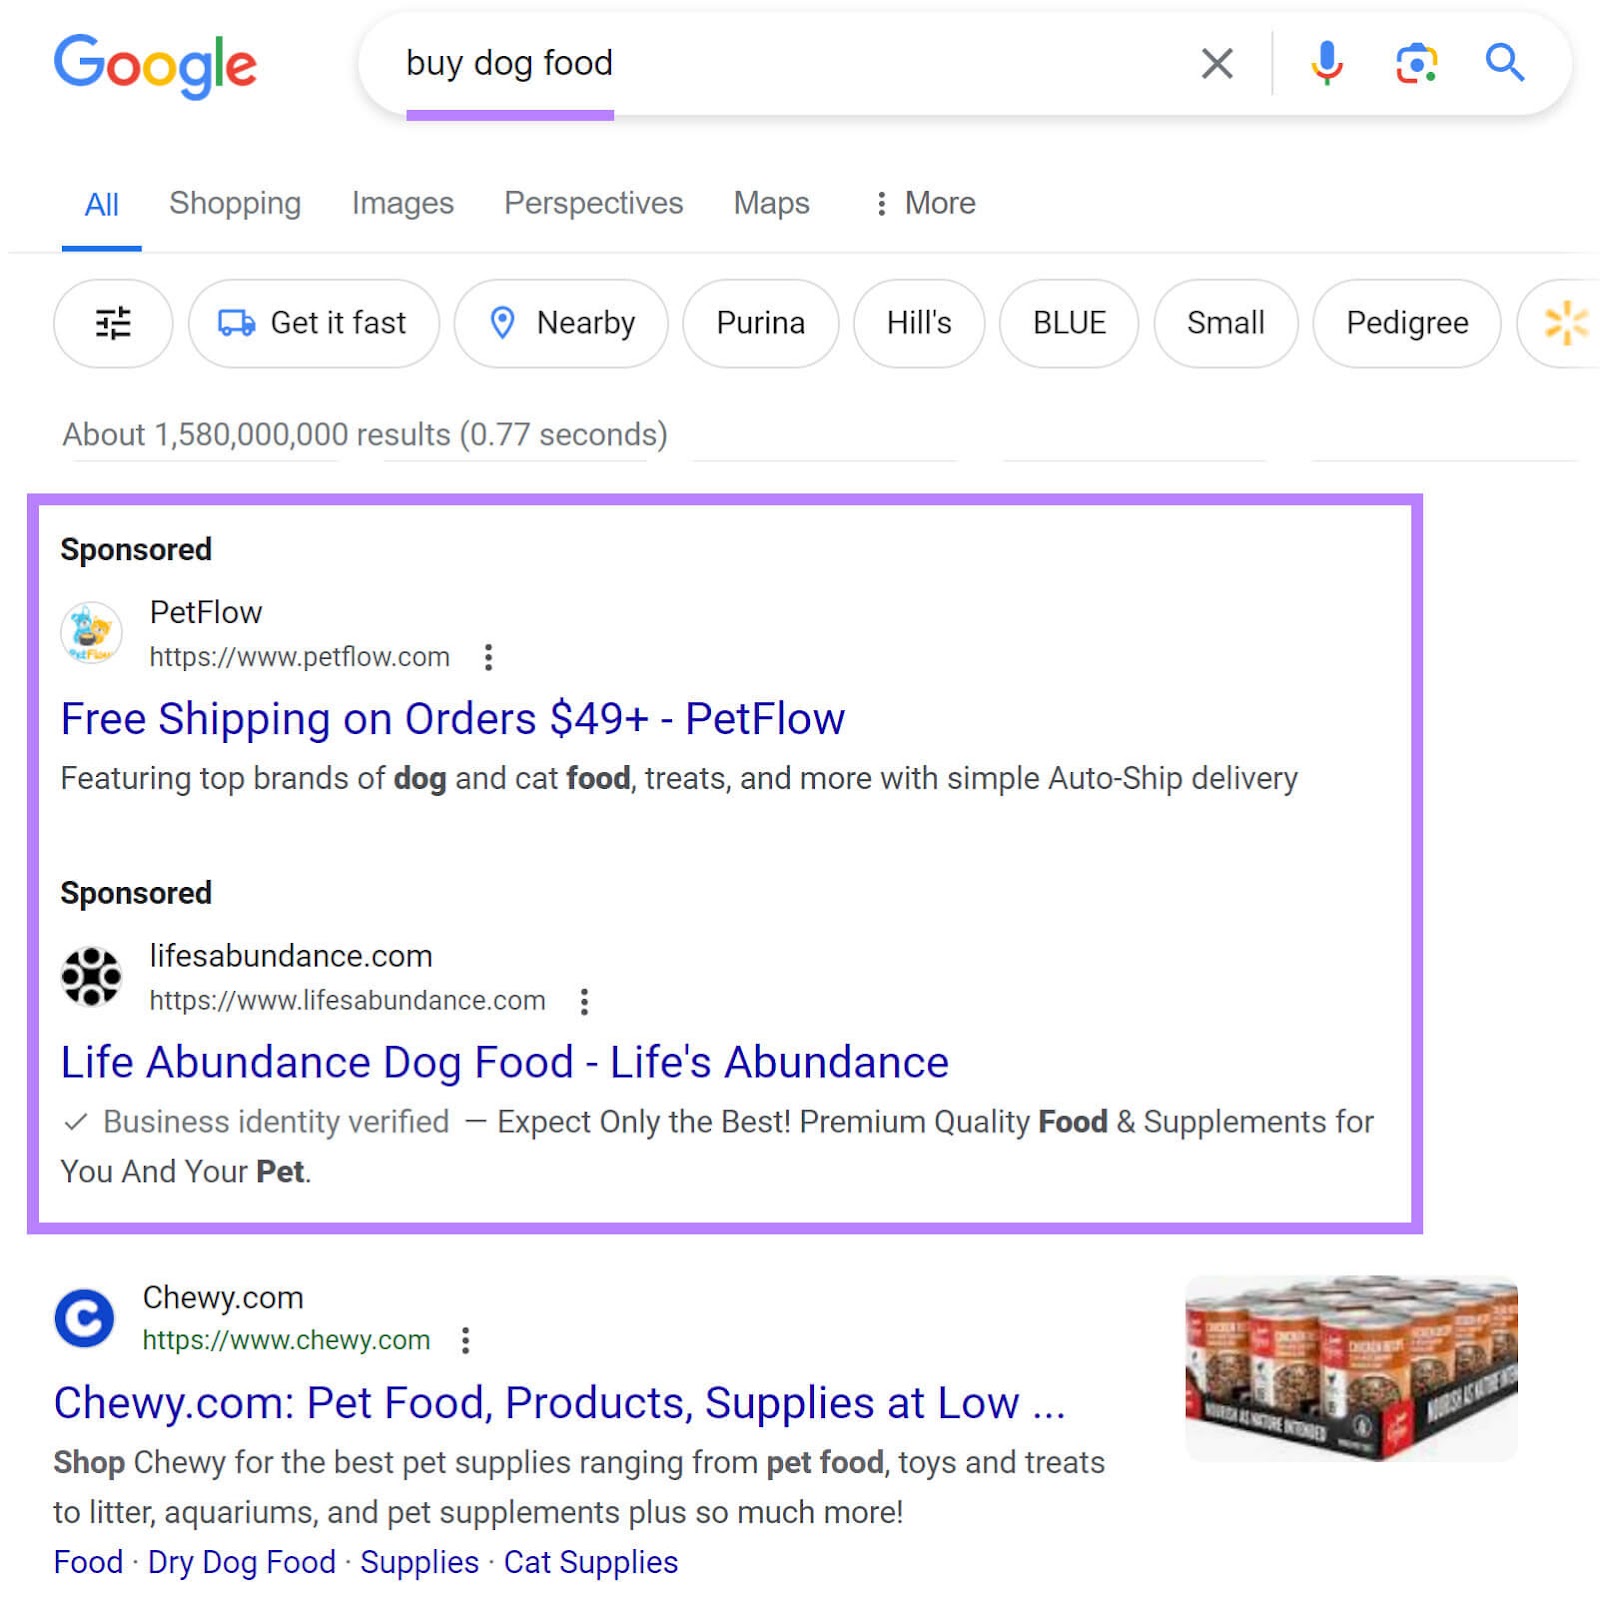 Search ads appearing on Google for